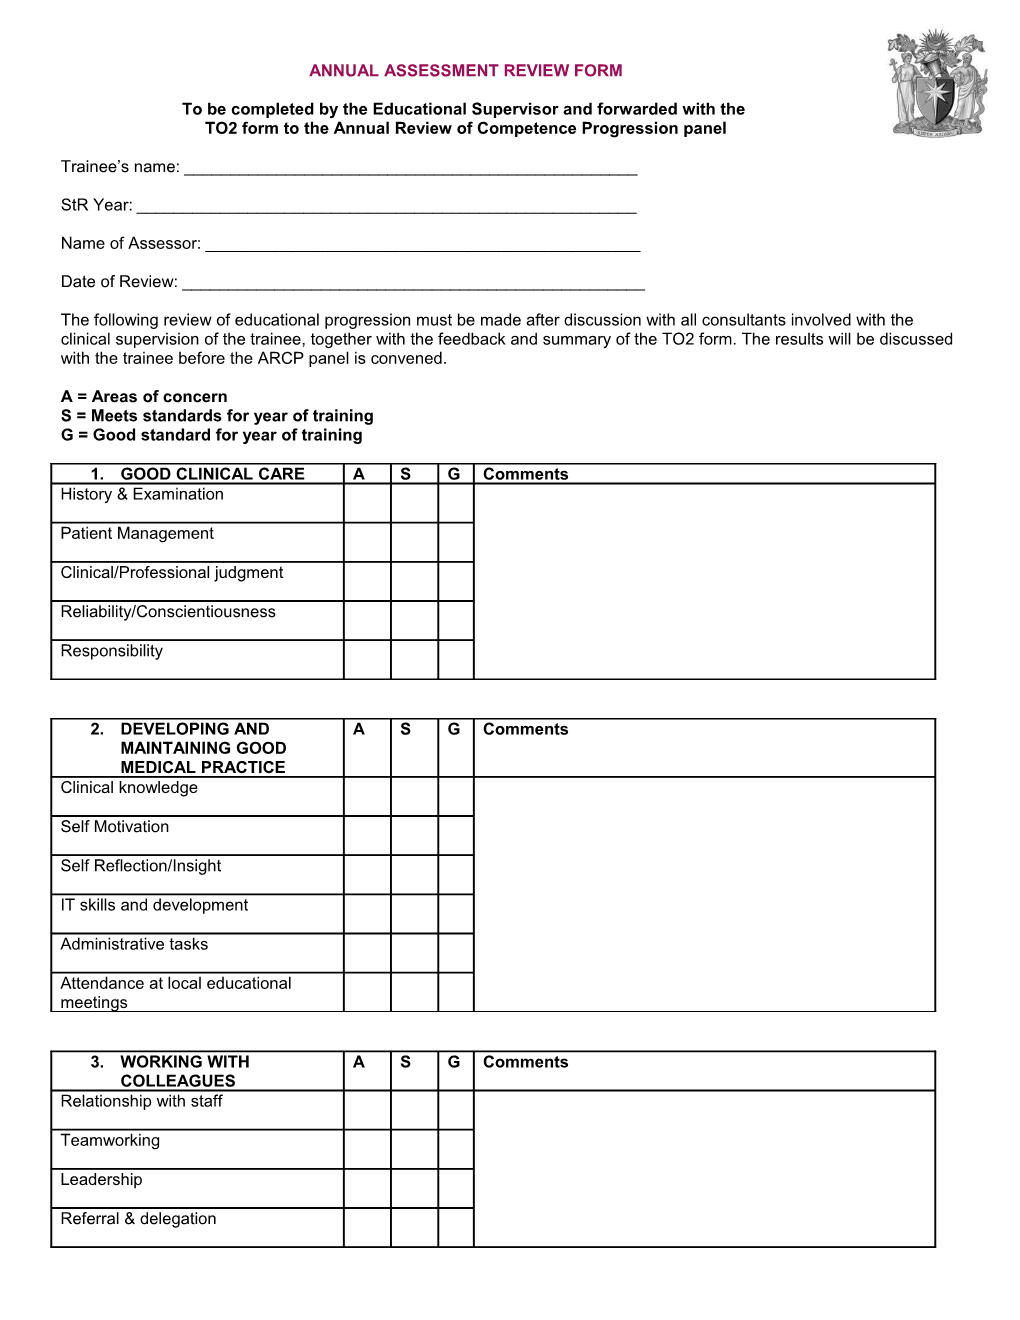 Annual Assessment Review Form